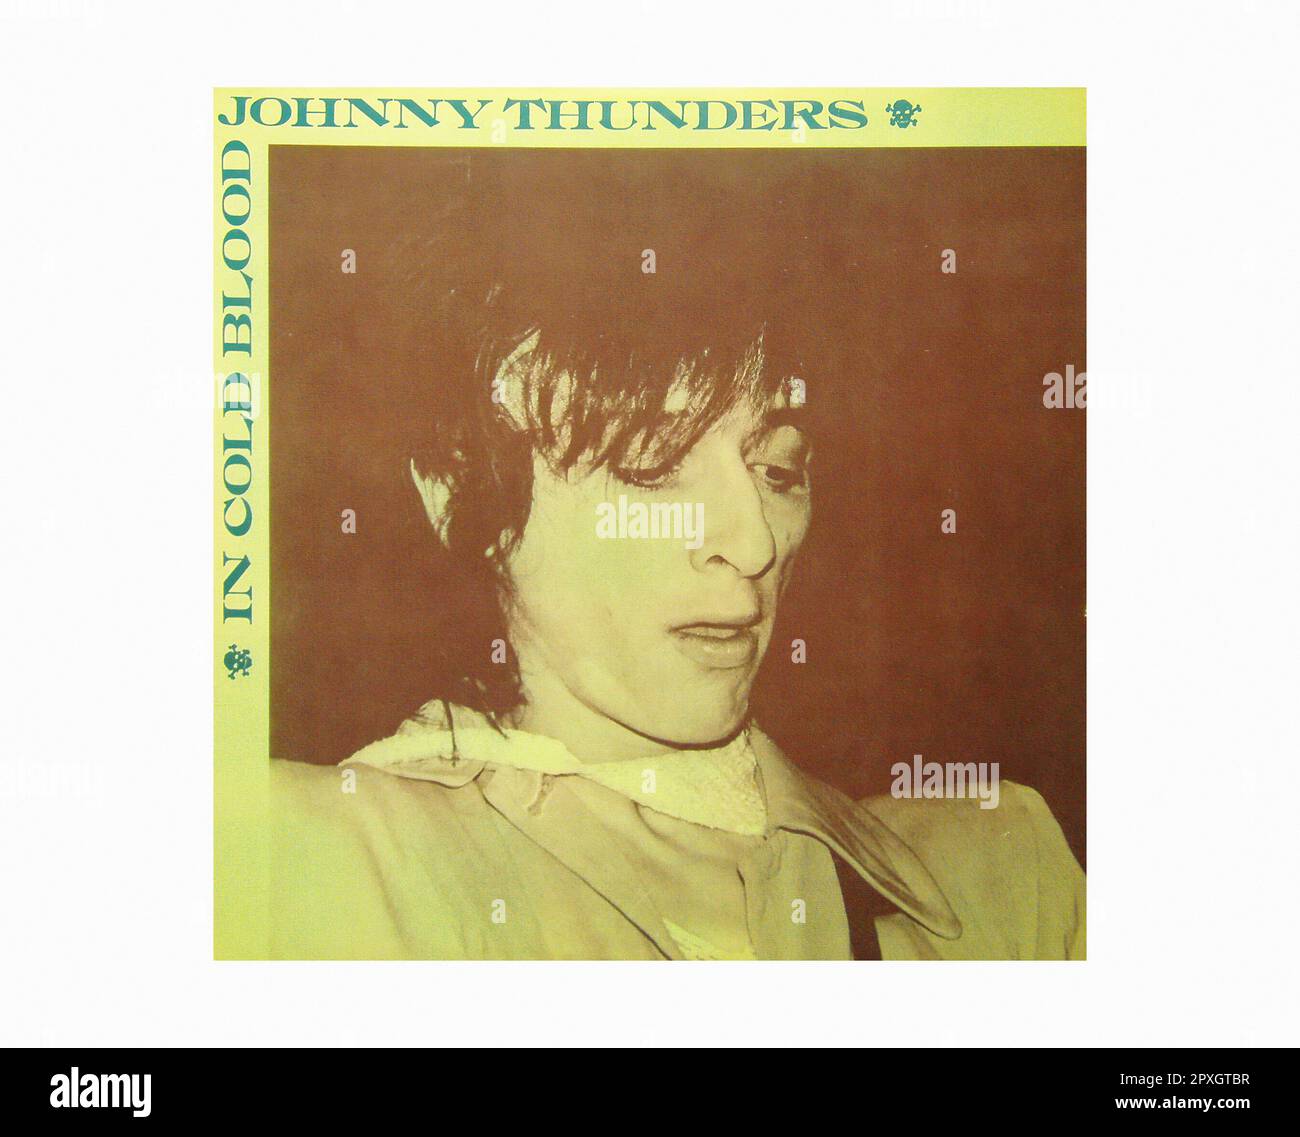 Johnny thunders - dans le sang froid [1983] - Vintage Vinyl Record Sleeve Banque D'Images